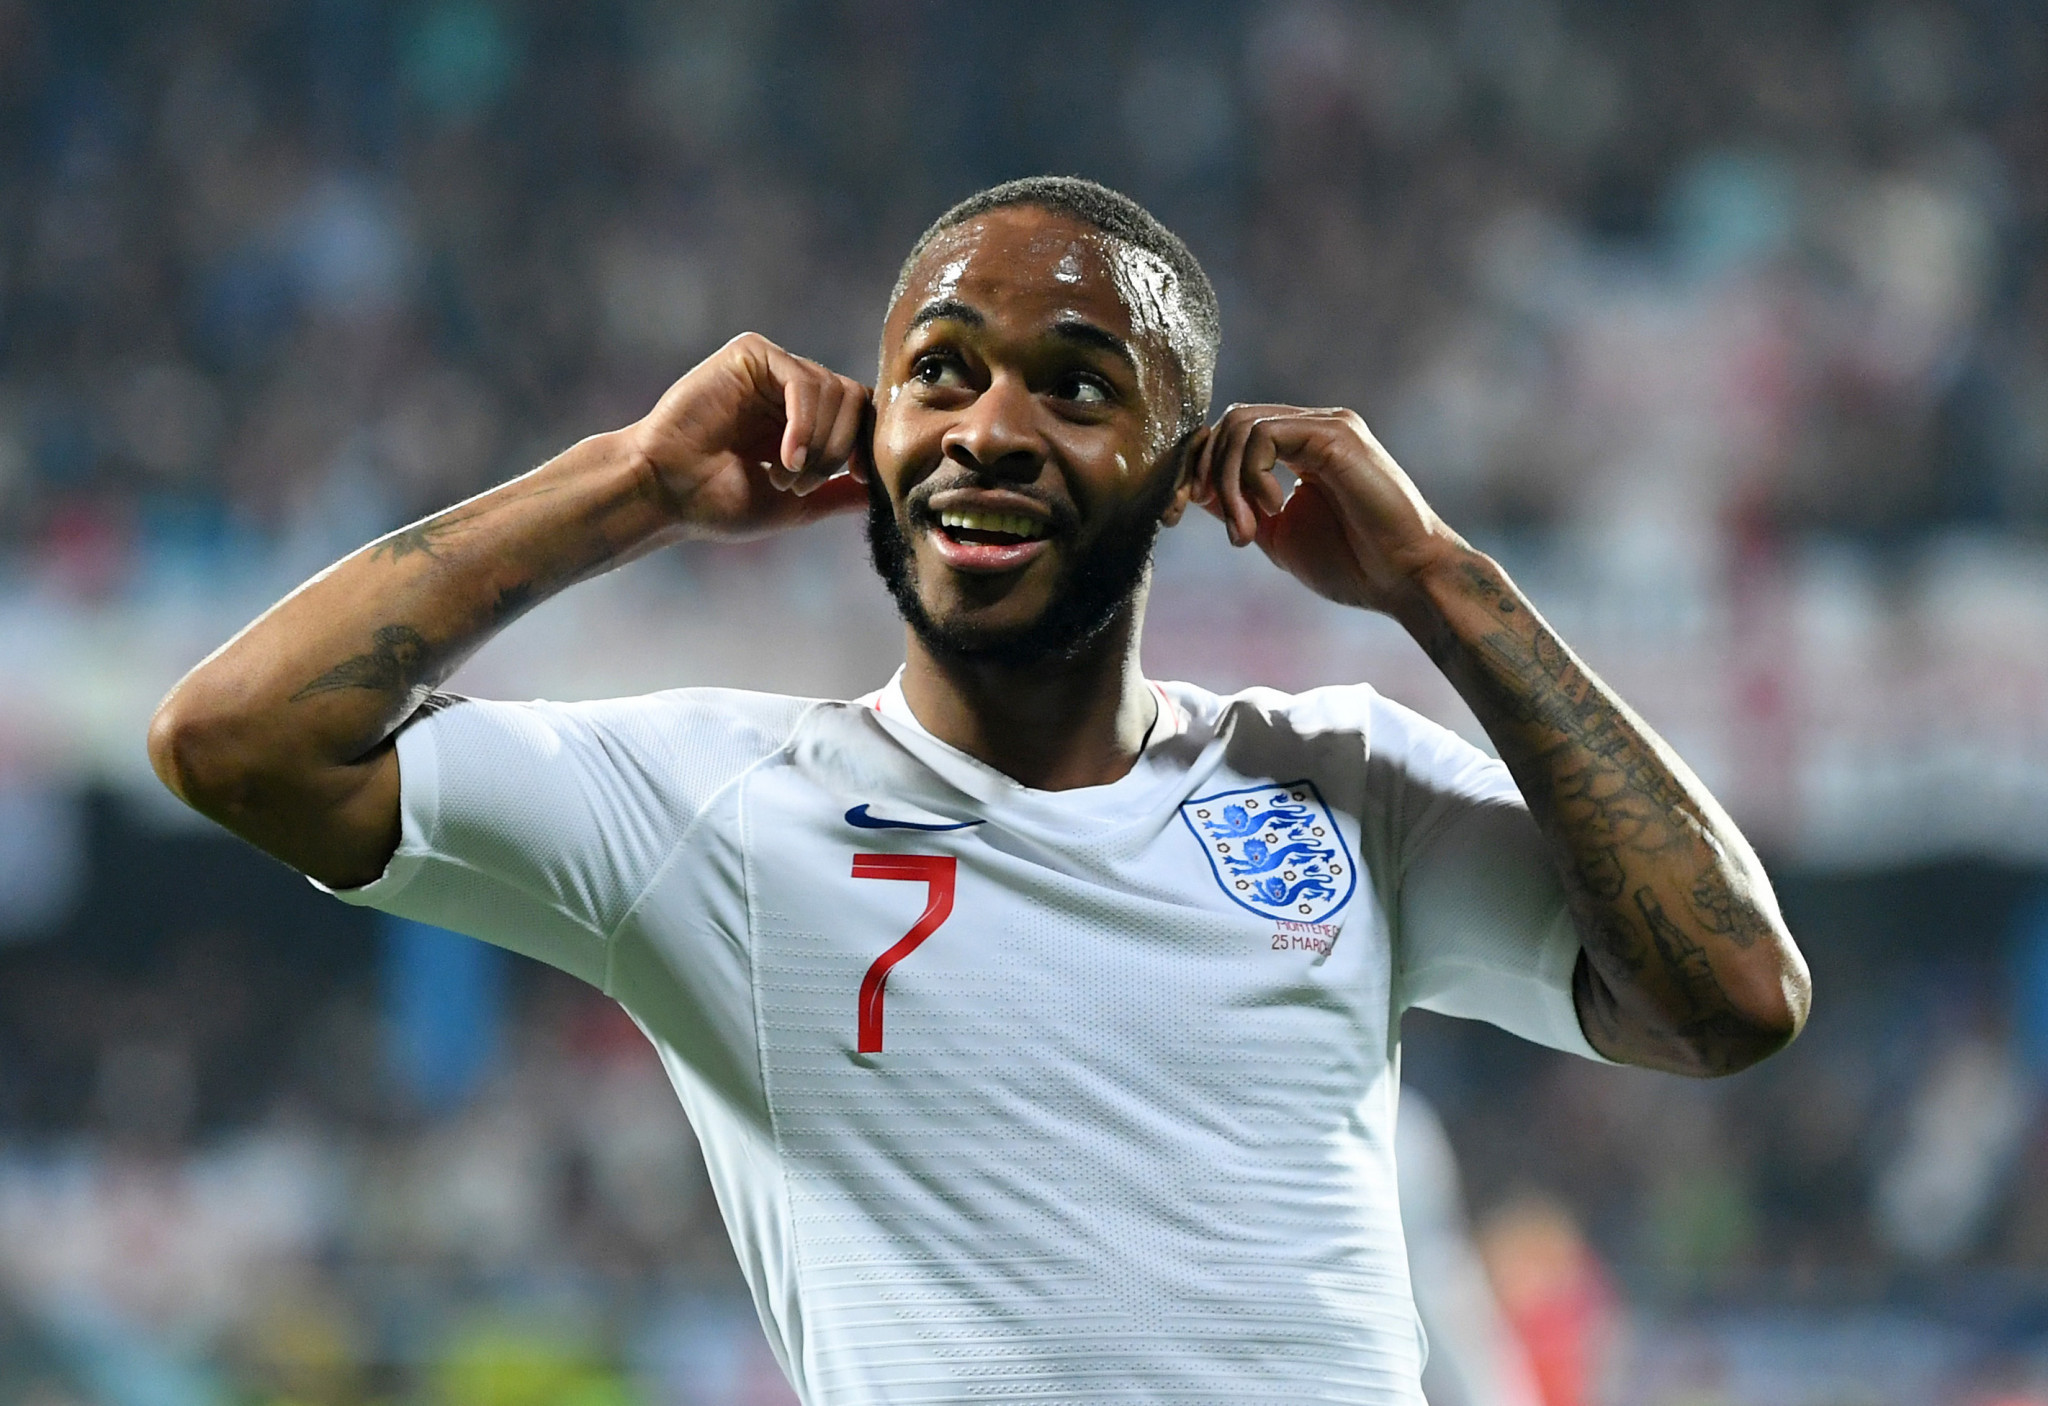 England's Raheem Sterling put his hands to his ears in response to the reported racist abuse he received during the Euro 2020 qualifying match in Montenegro ©Getty Images